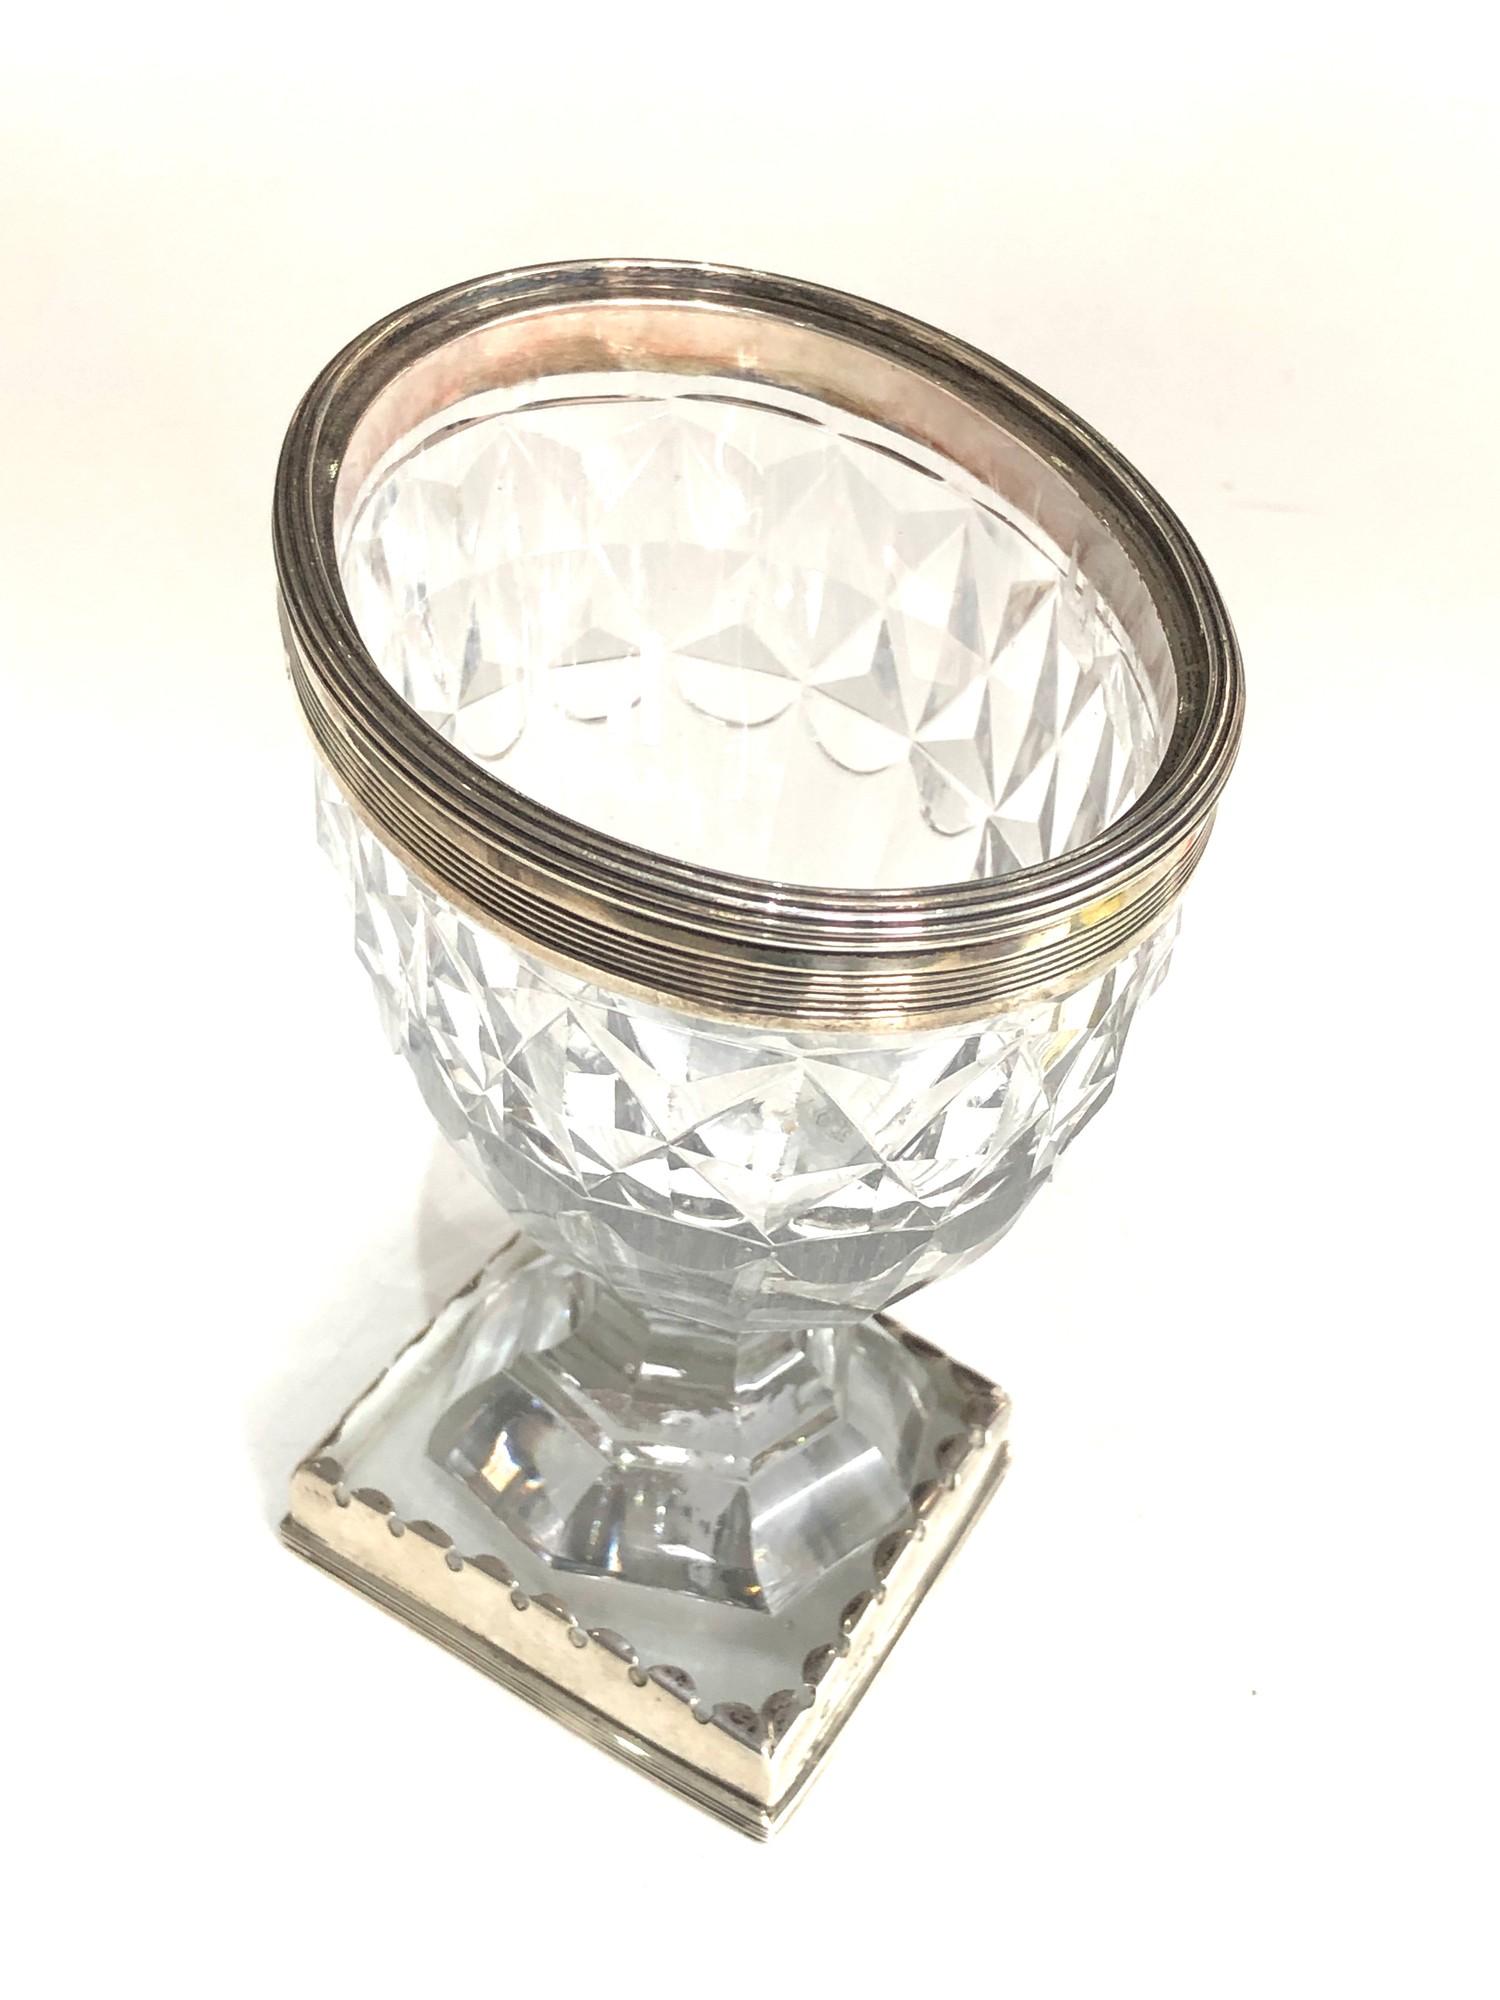 Antique georgian silver mounted cut glass sweetmeat vase later silver mount to base measures - Image 2 of 6